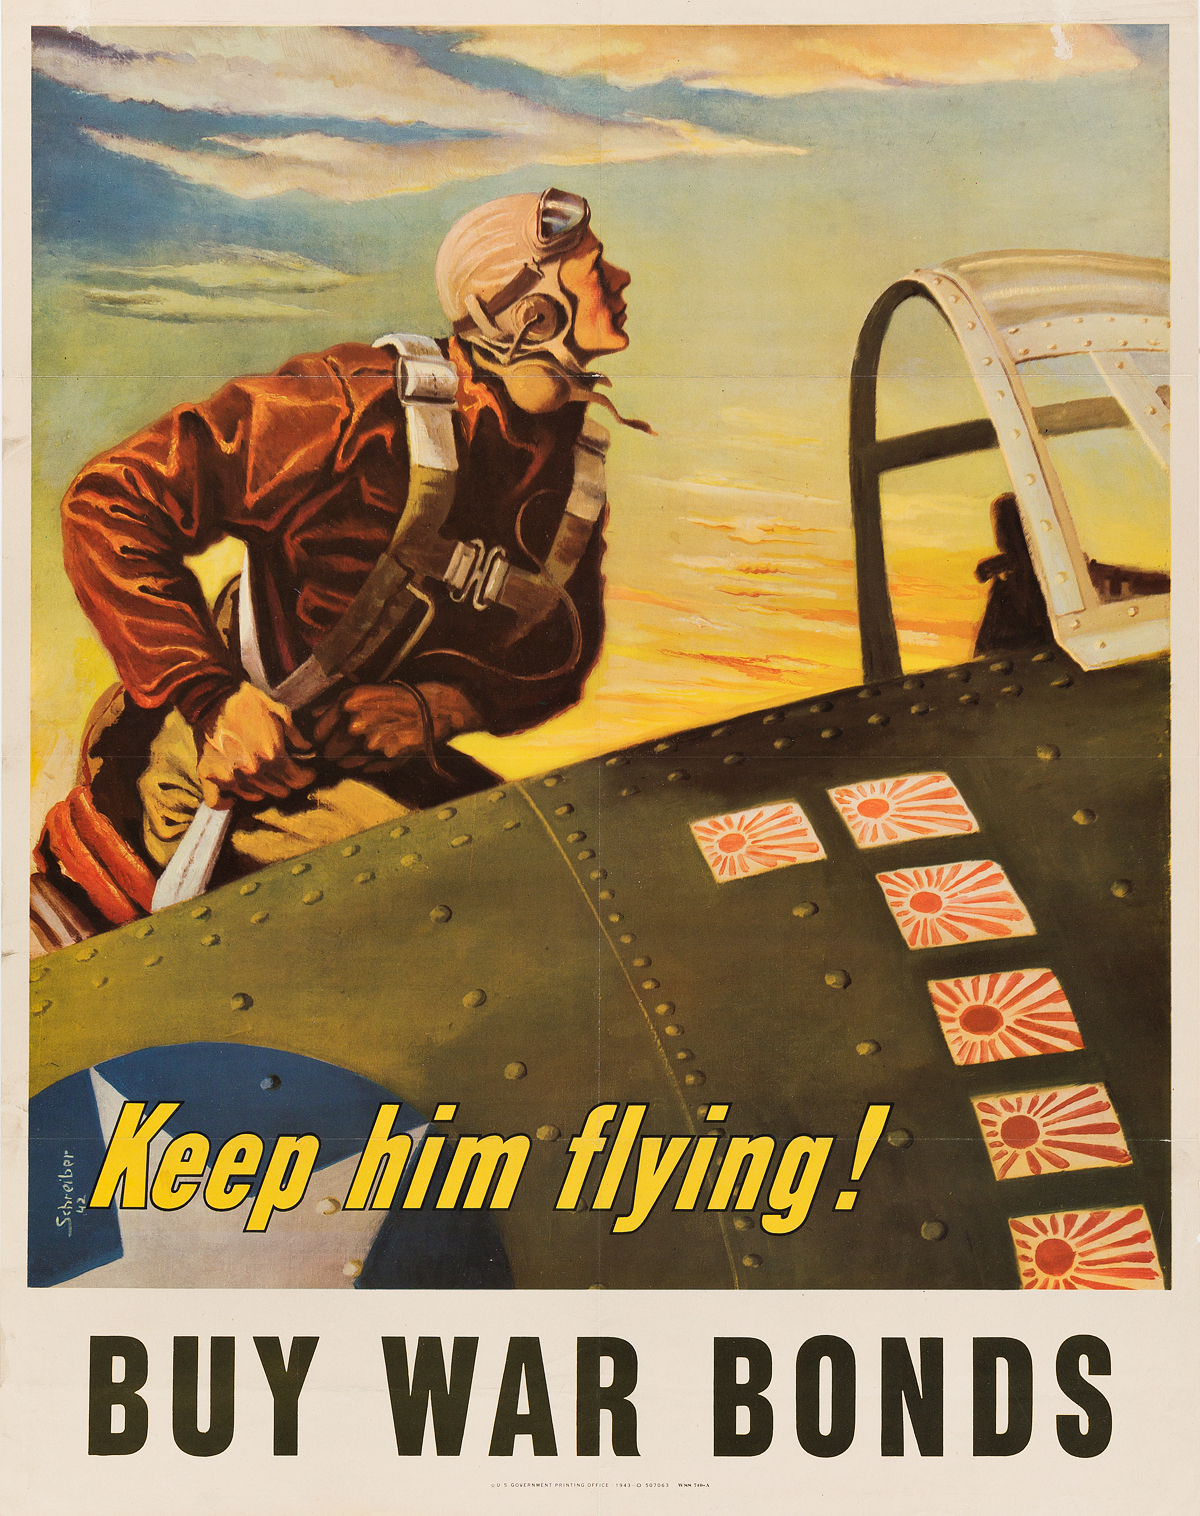 GEORGES SCHREIBER (1904-1977). KEEP HIM FLYING! / BUY WAR BONDS. 1943. 28x22 inches, 71x56 cm. U.S. Government Printing Office, [Washin